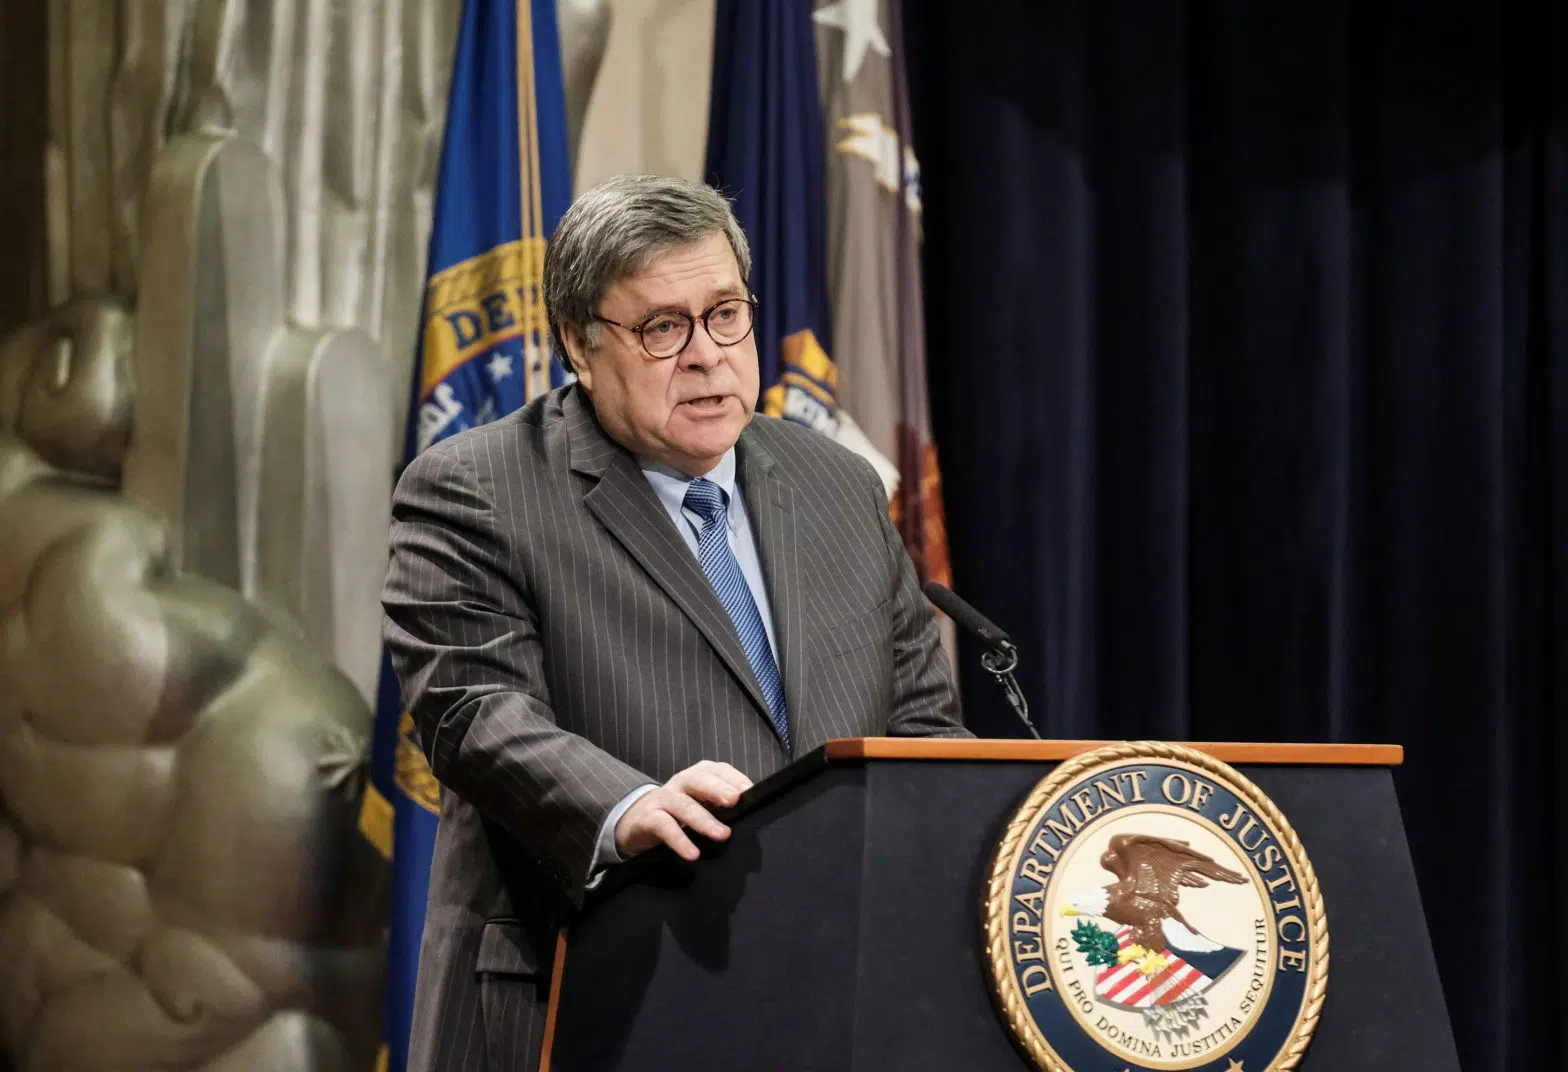 Will There Be an Investigation of U.S. Attorney General Barr?